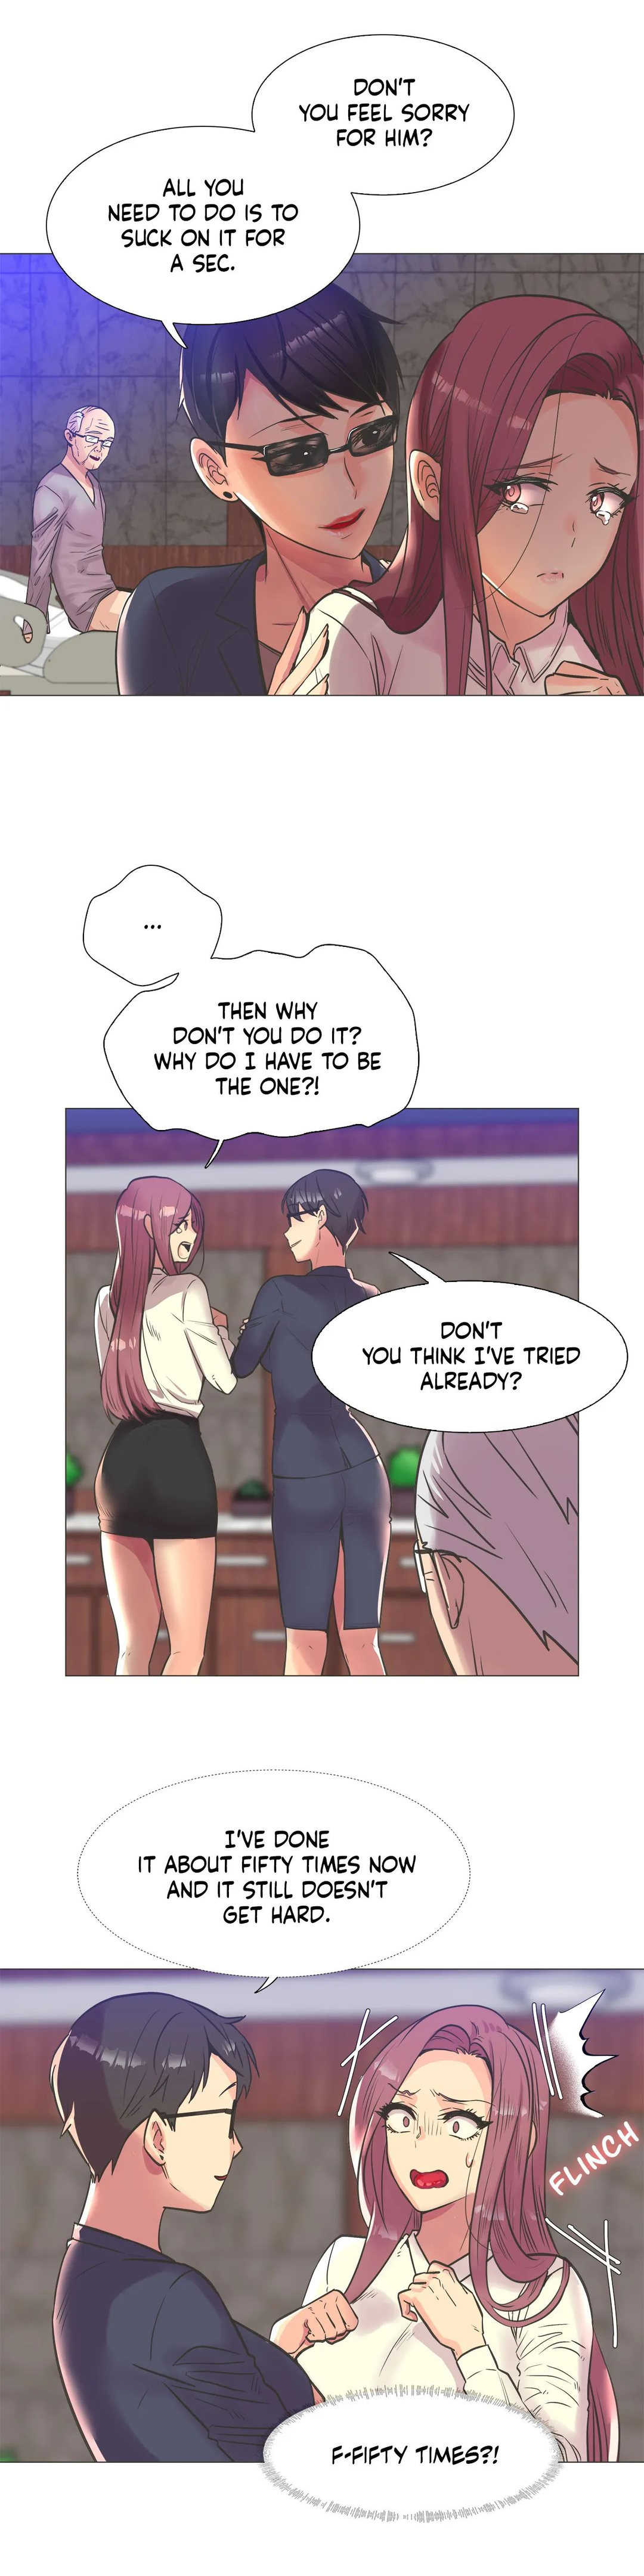 The Yes Girl - Chapter 99 Page 2